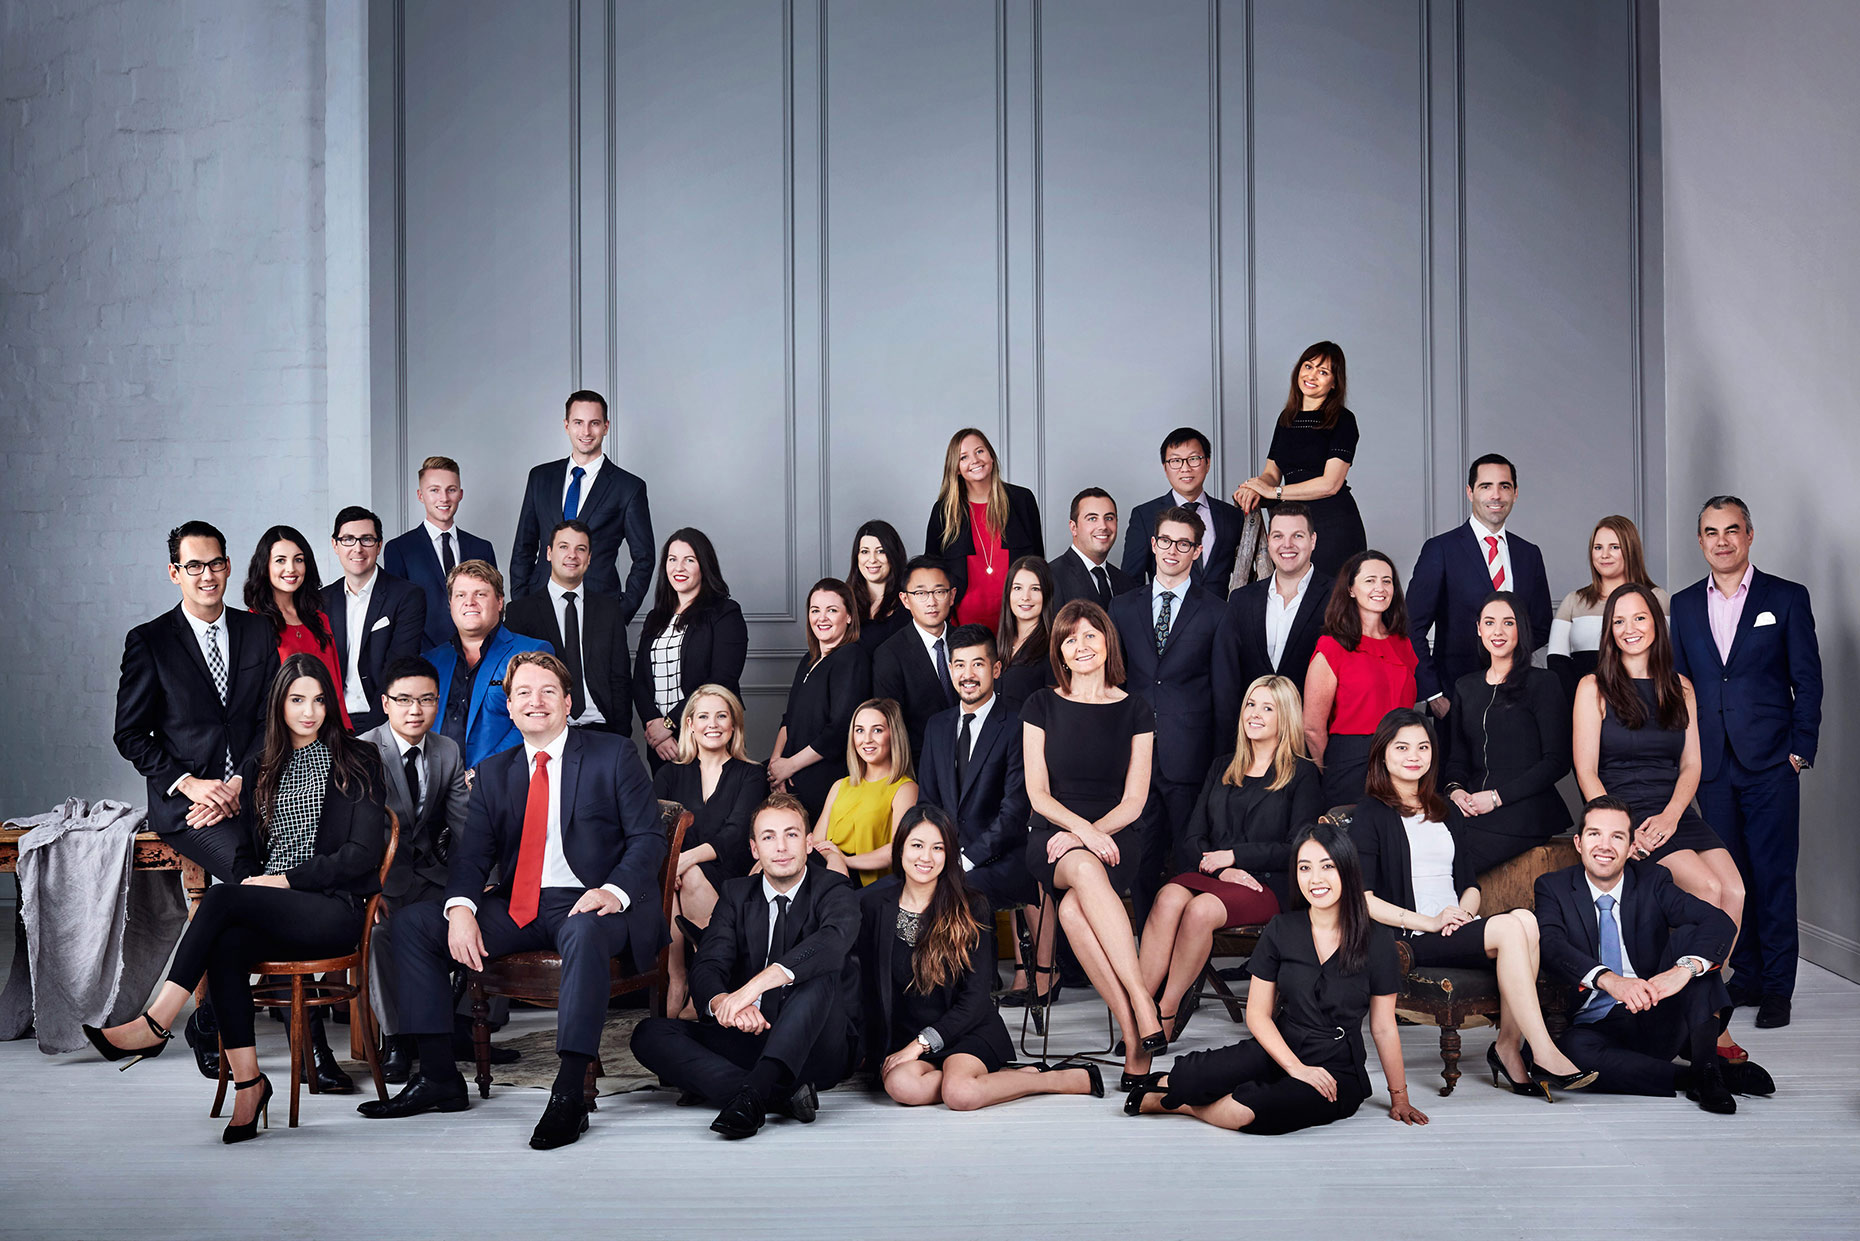 Corporate group shot in studio by portrait photographer James Braund 